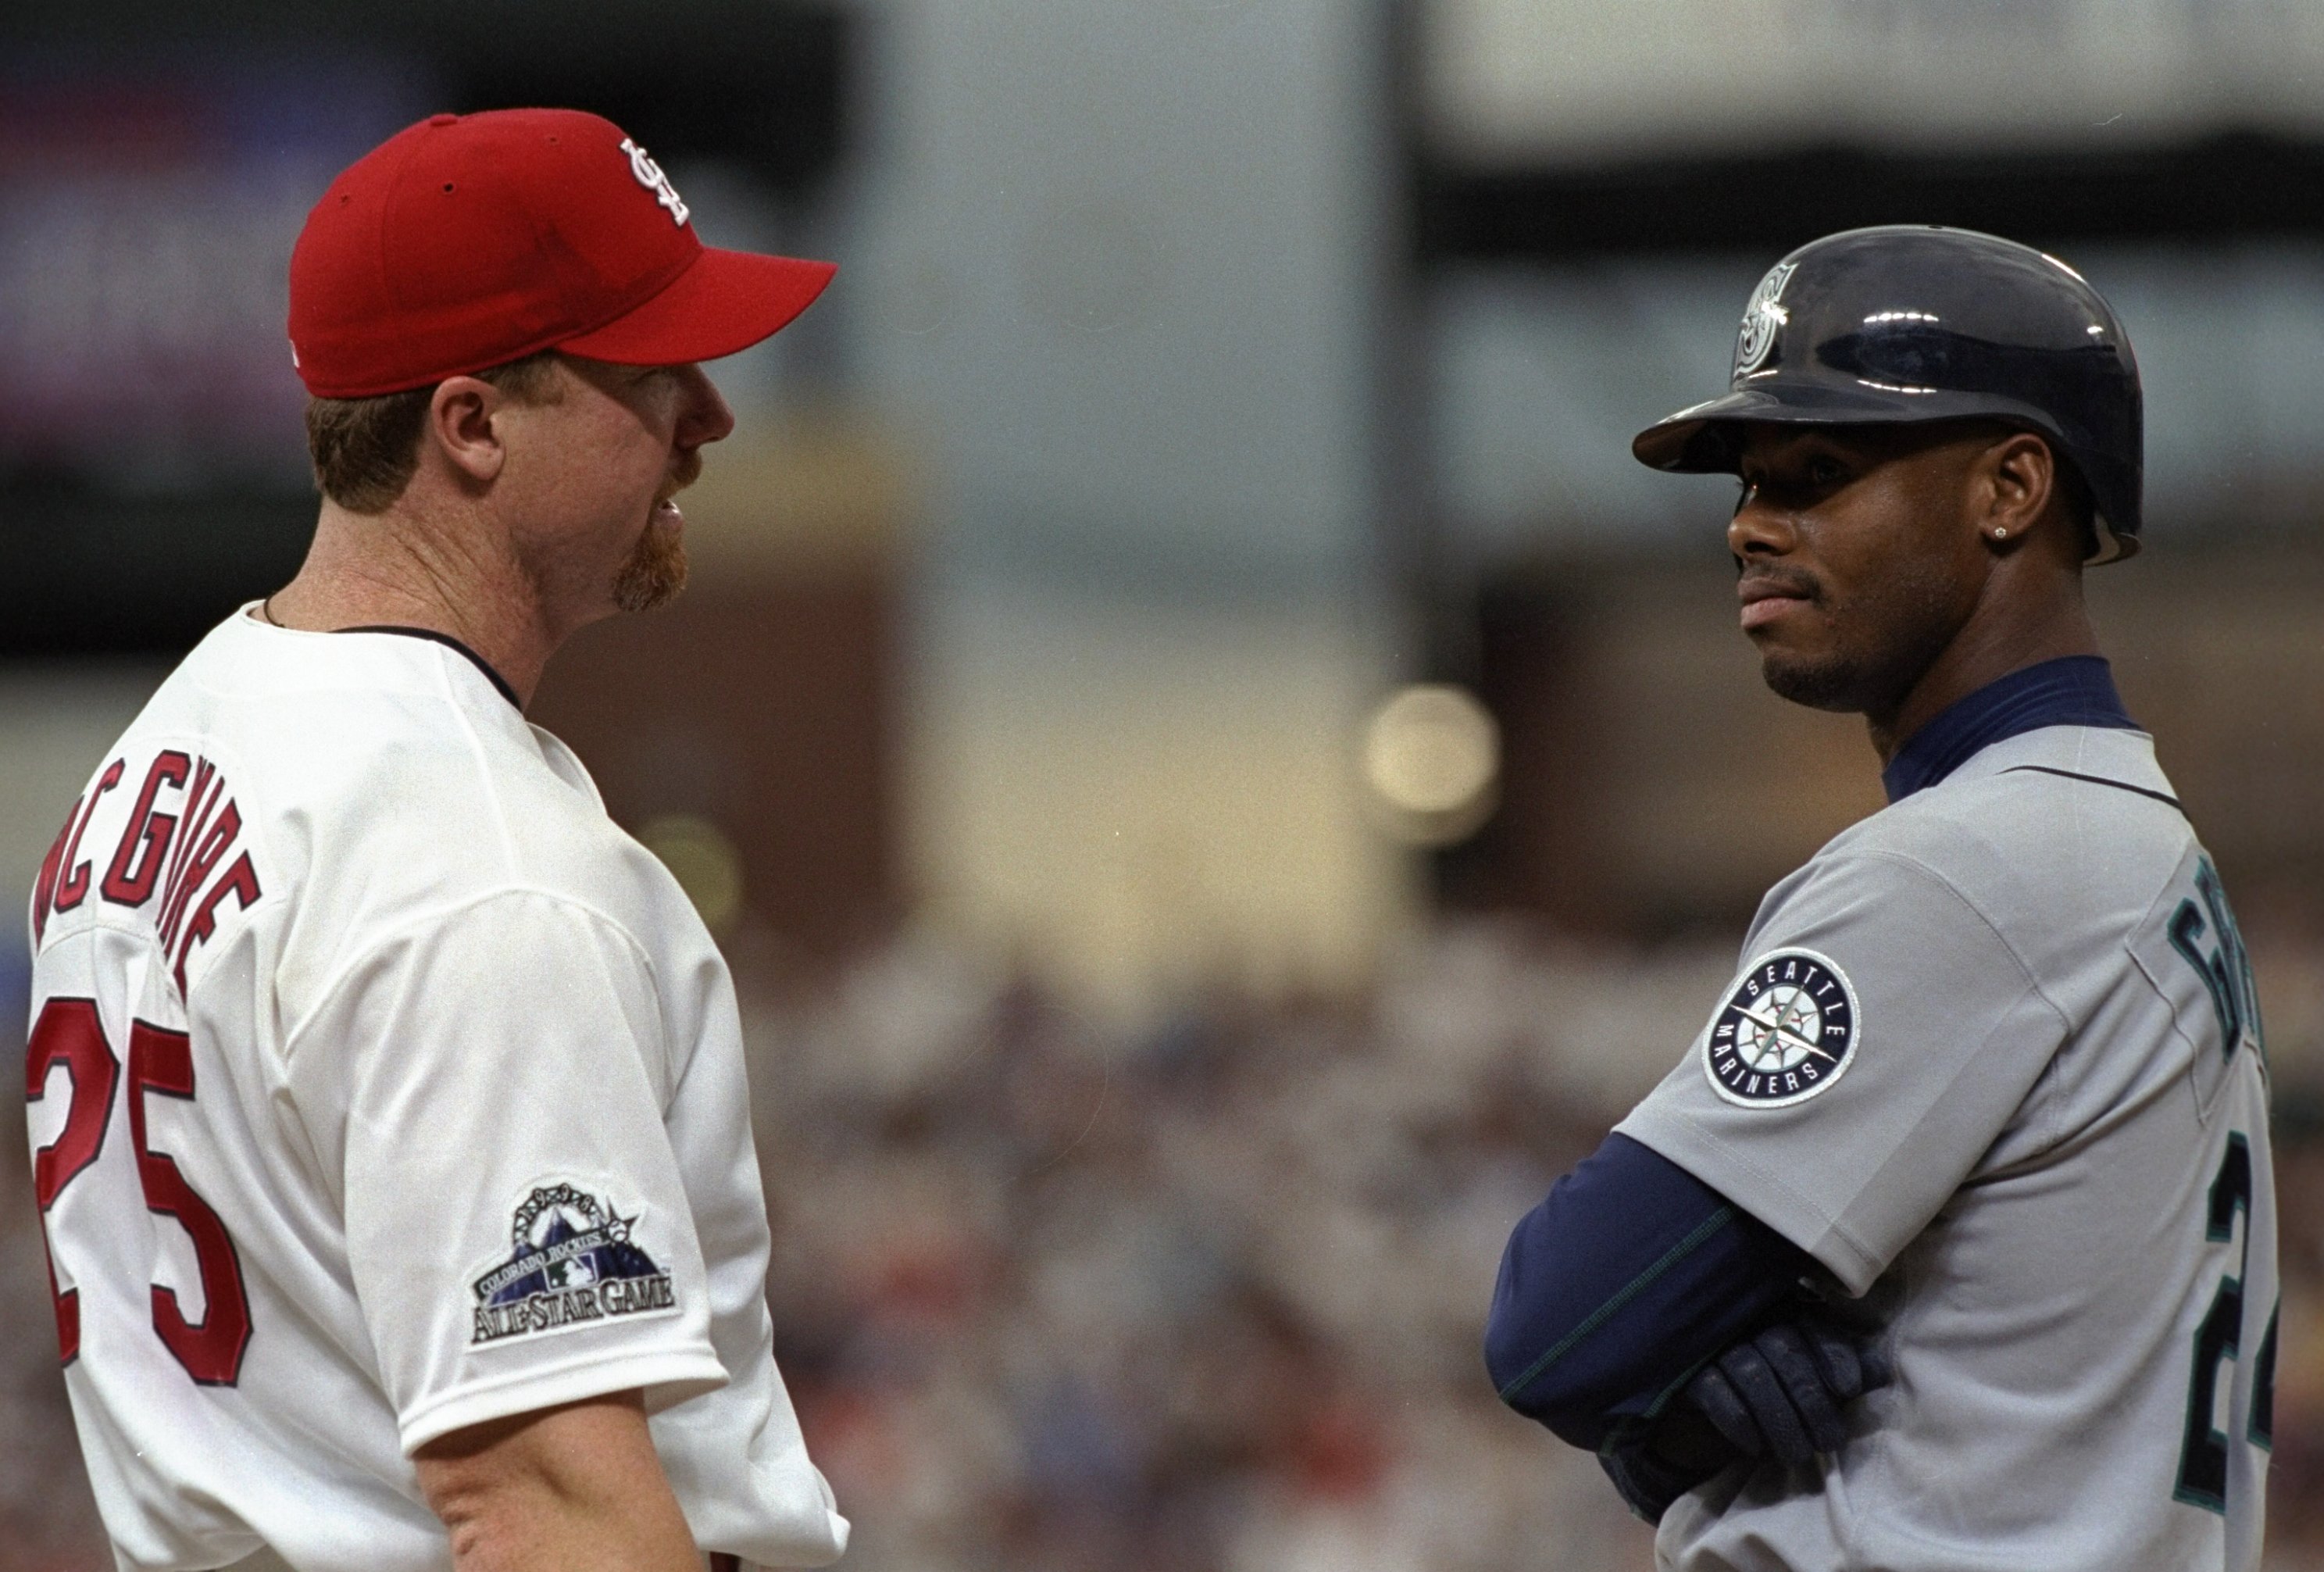 How Sammy Sosa and Mark McGwire united fans in 1998